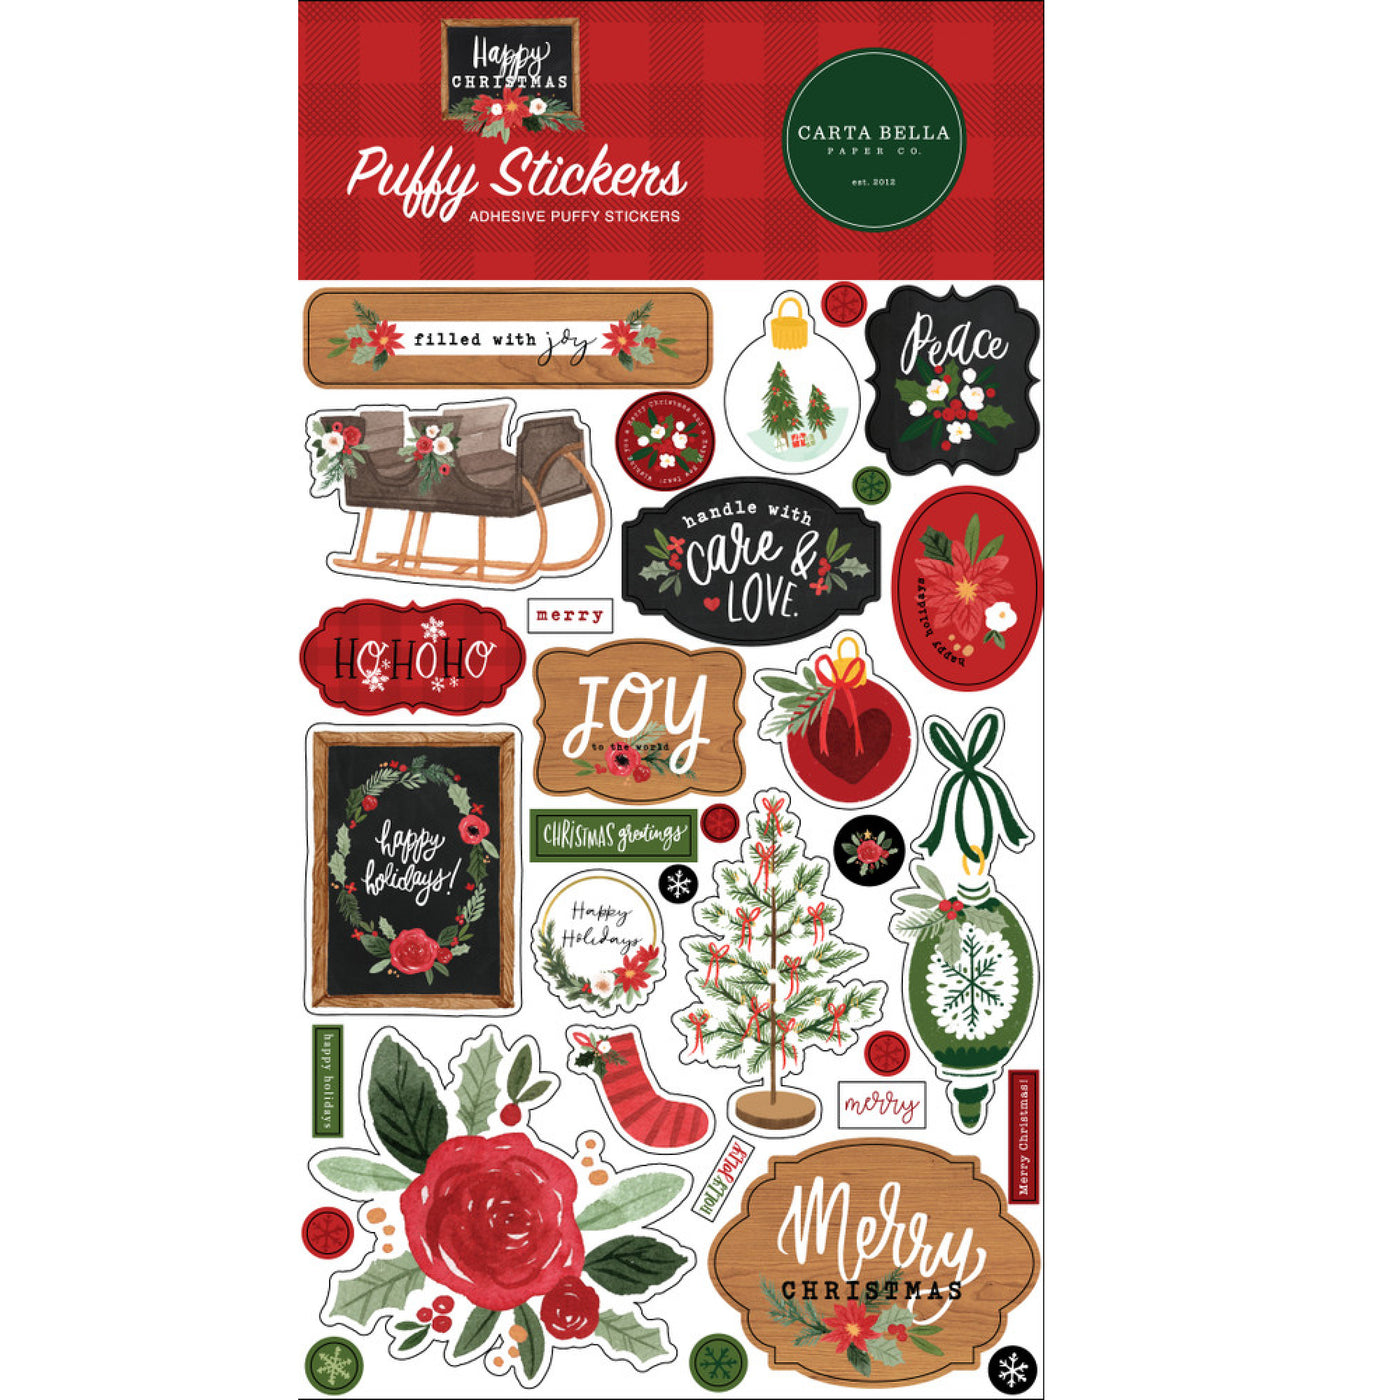 32 Puffy Stickers in various shapes and sizes; adhesive back, designed to coordinate with Happy Christmas Collection by Carta Bella.